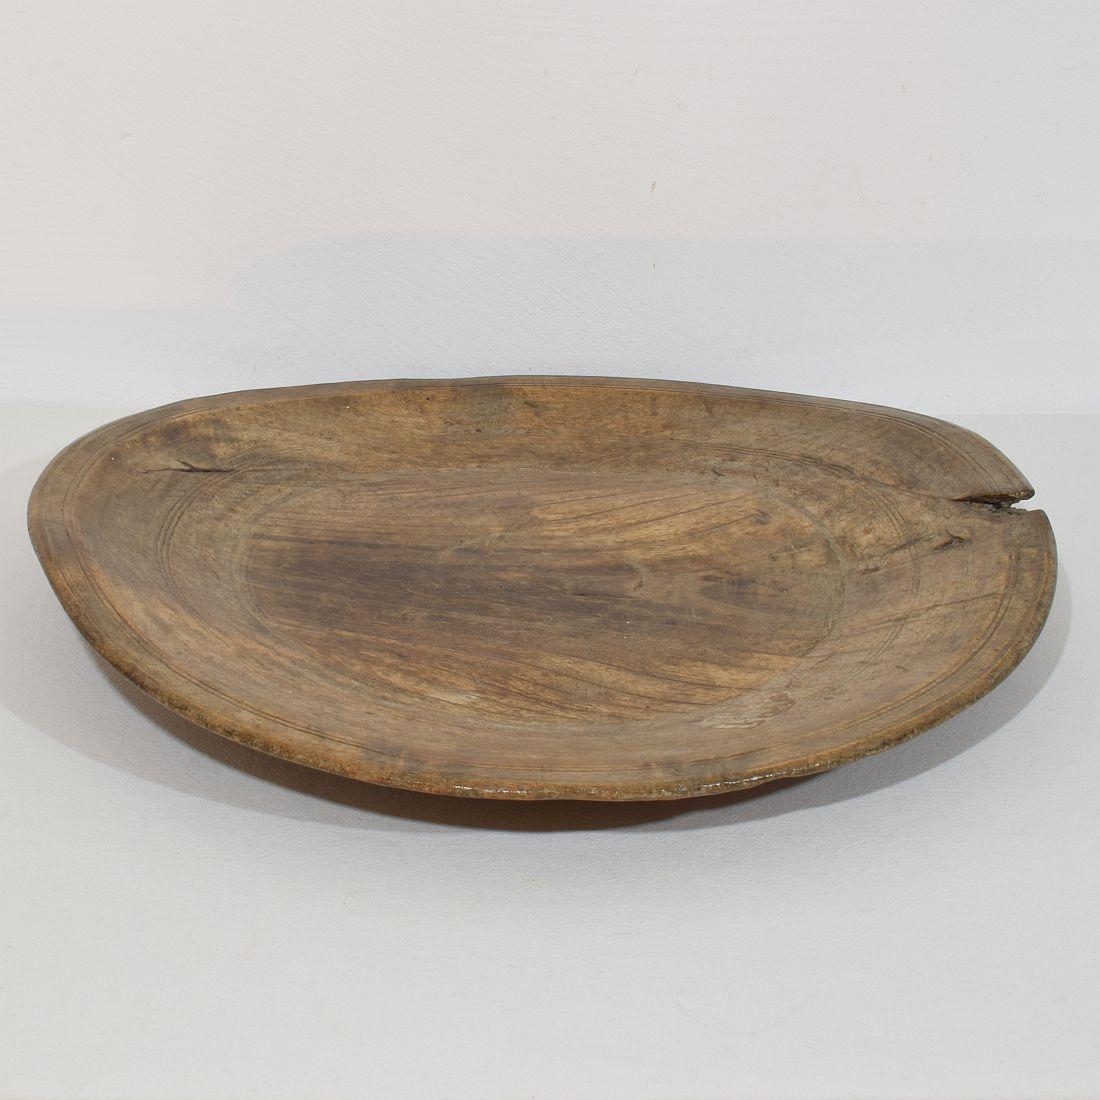 Large 18th Century French Wooden Bowl / Platter In Good Condition For Sale In Buisson, FR